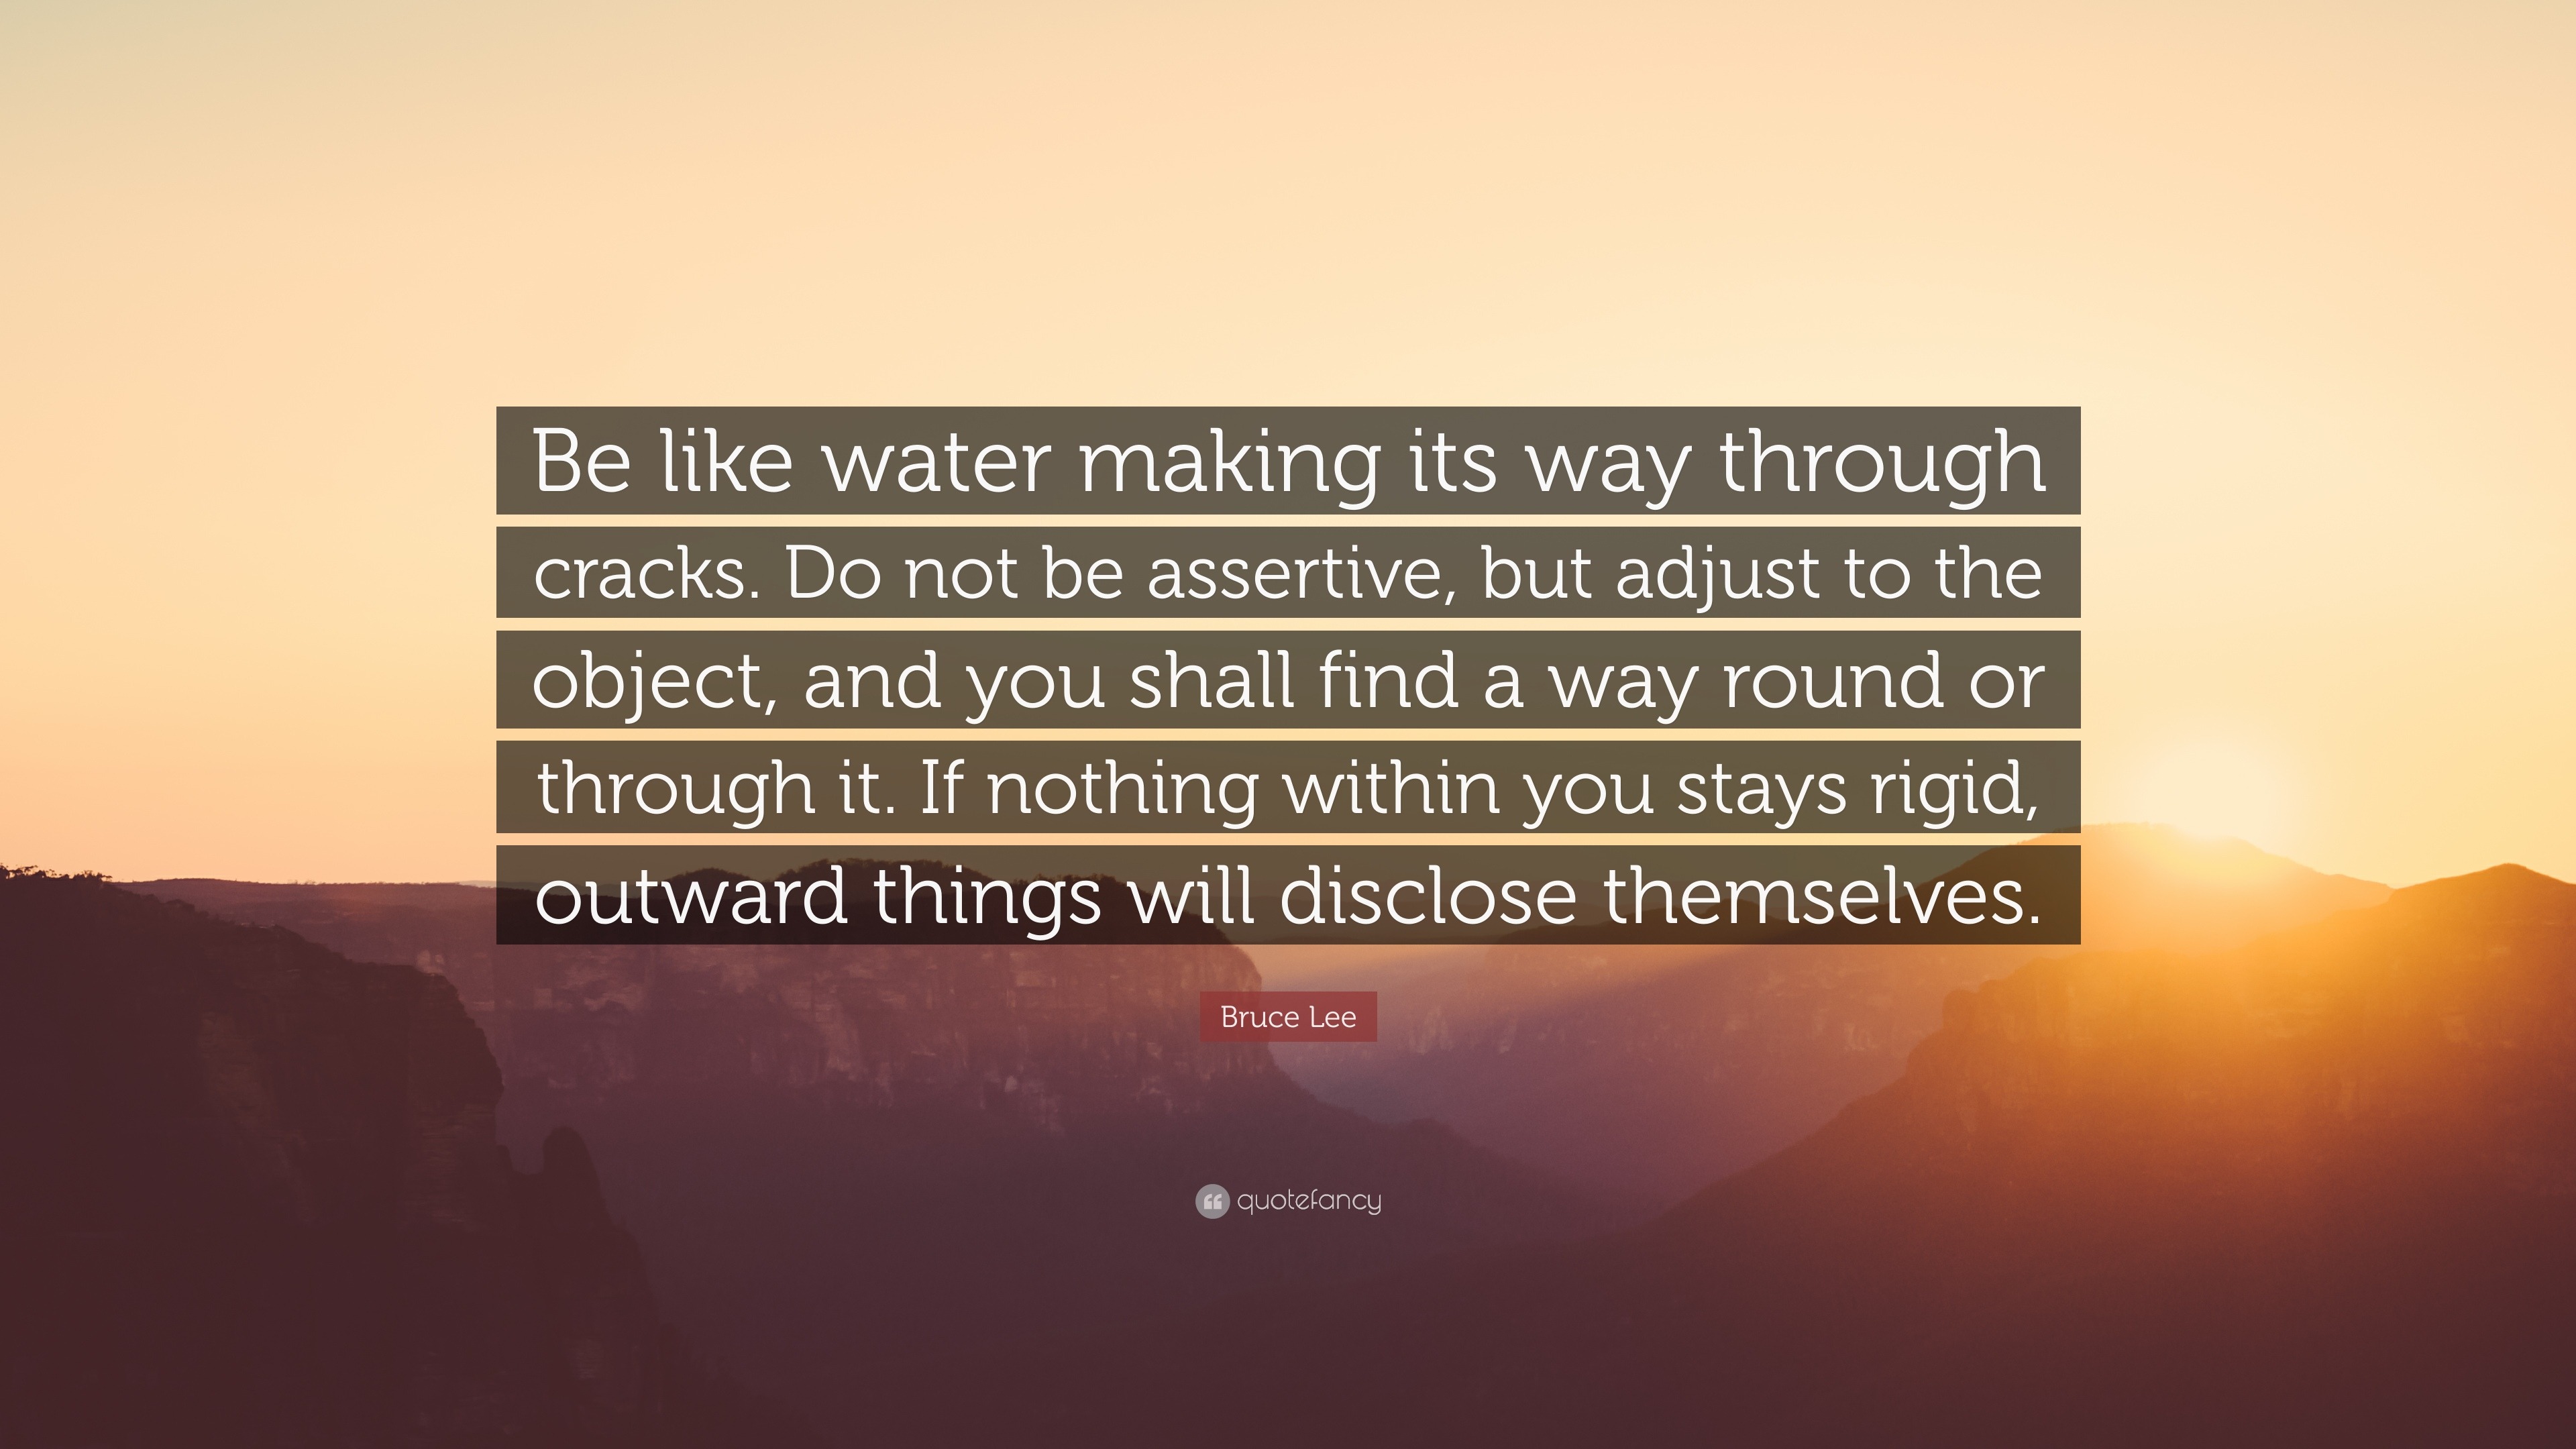 Bruce Lee Quote Be Like Water Making Its Way Through Cracks Do Not Be Assertive But Adjust To The Object And You Shall Find A Way Rou 12 Wallpapers Quotefancy